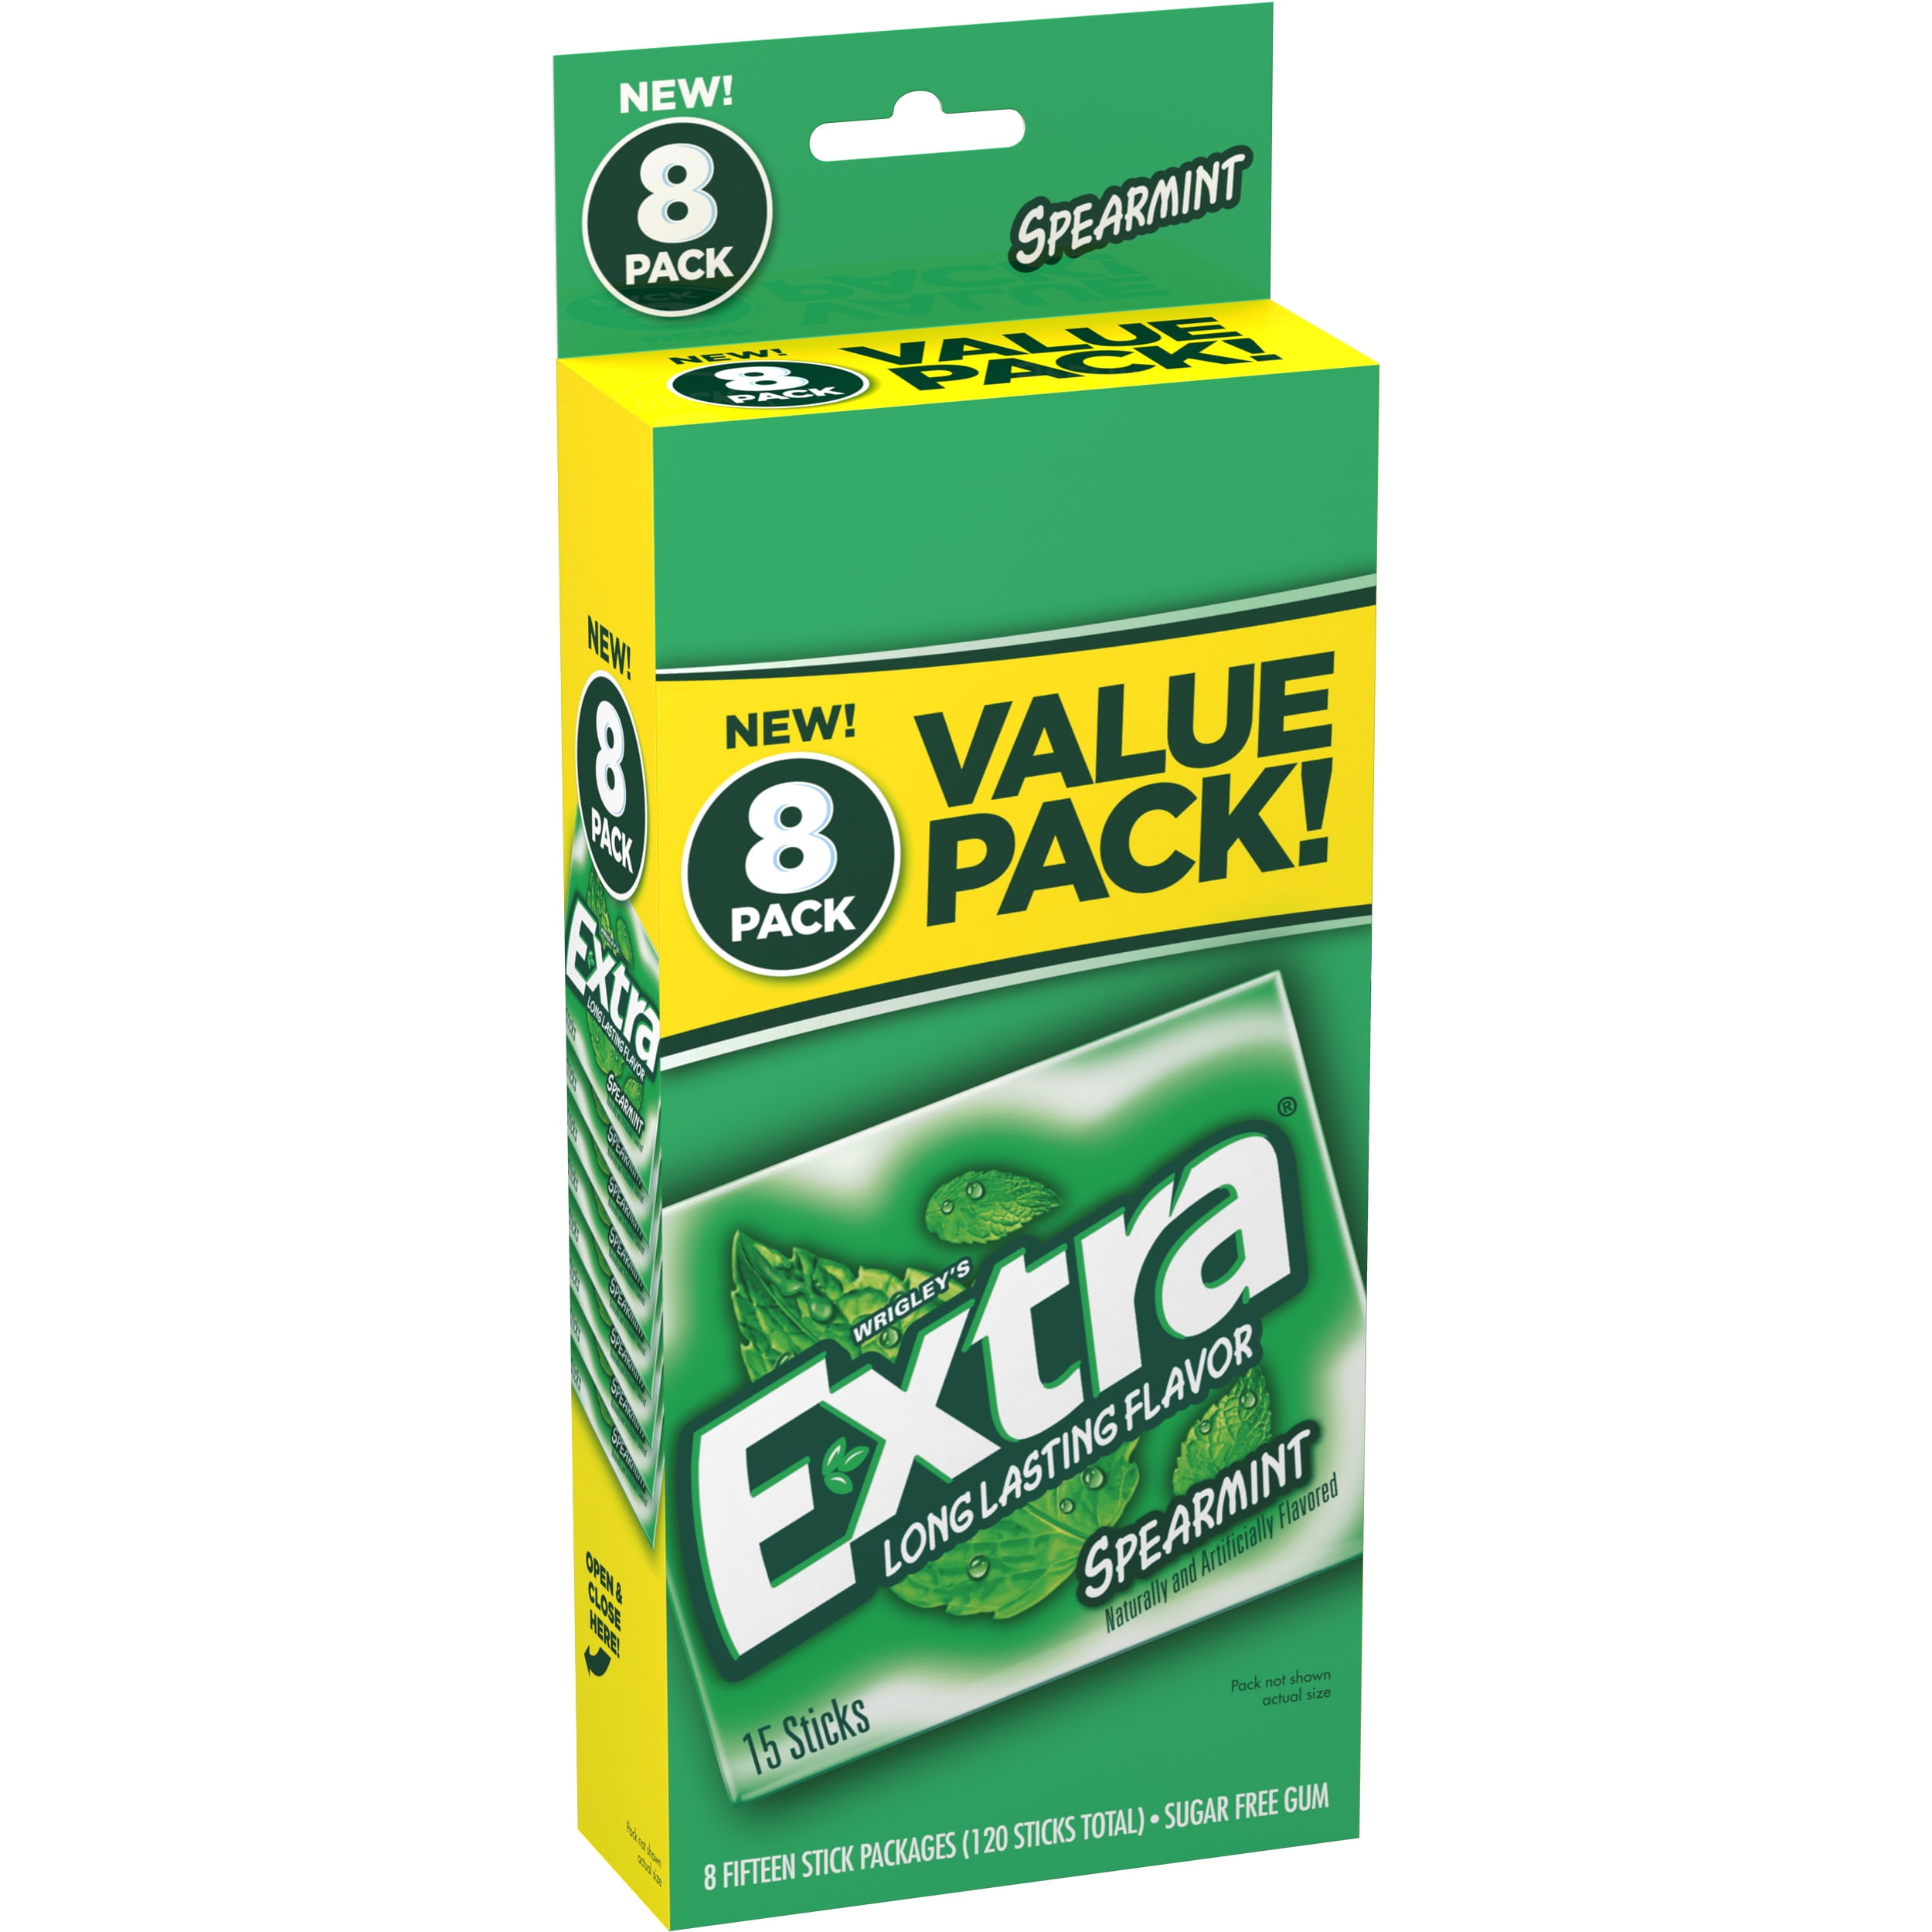 Extra Spearmint Sugar Free Chewing Gum Bulk - 15 ct (8 Pack)